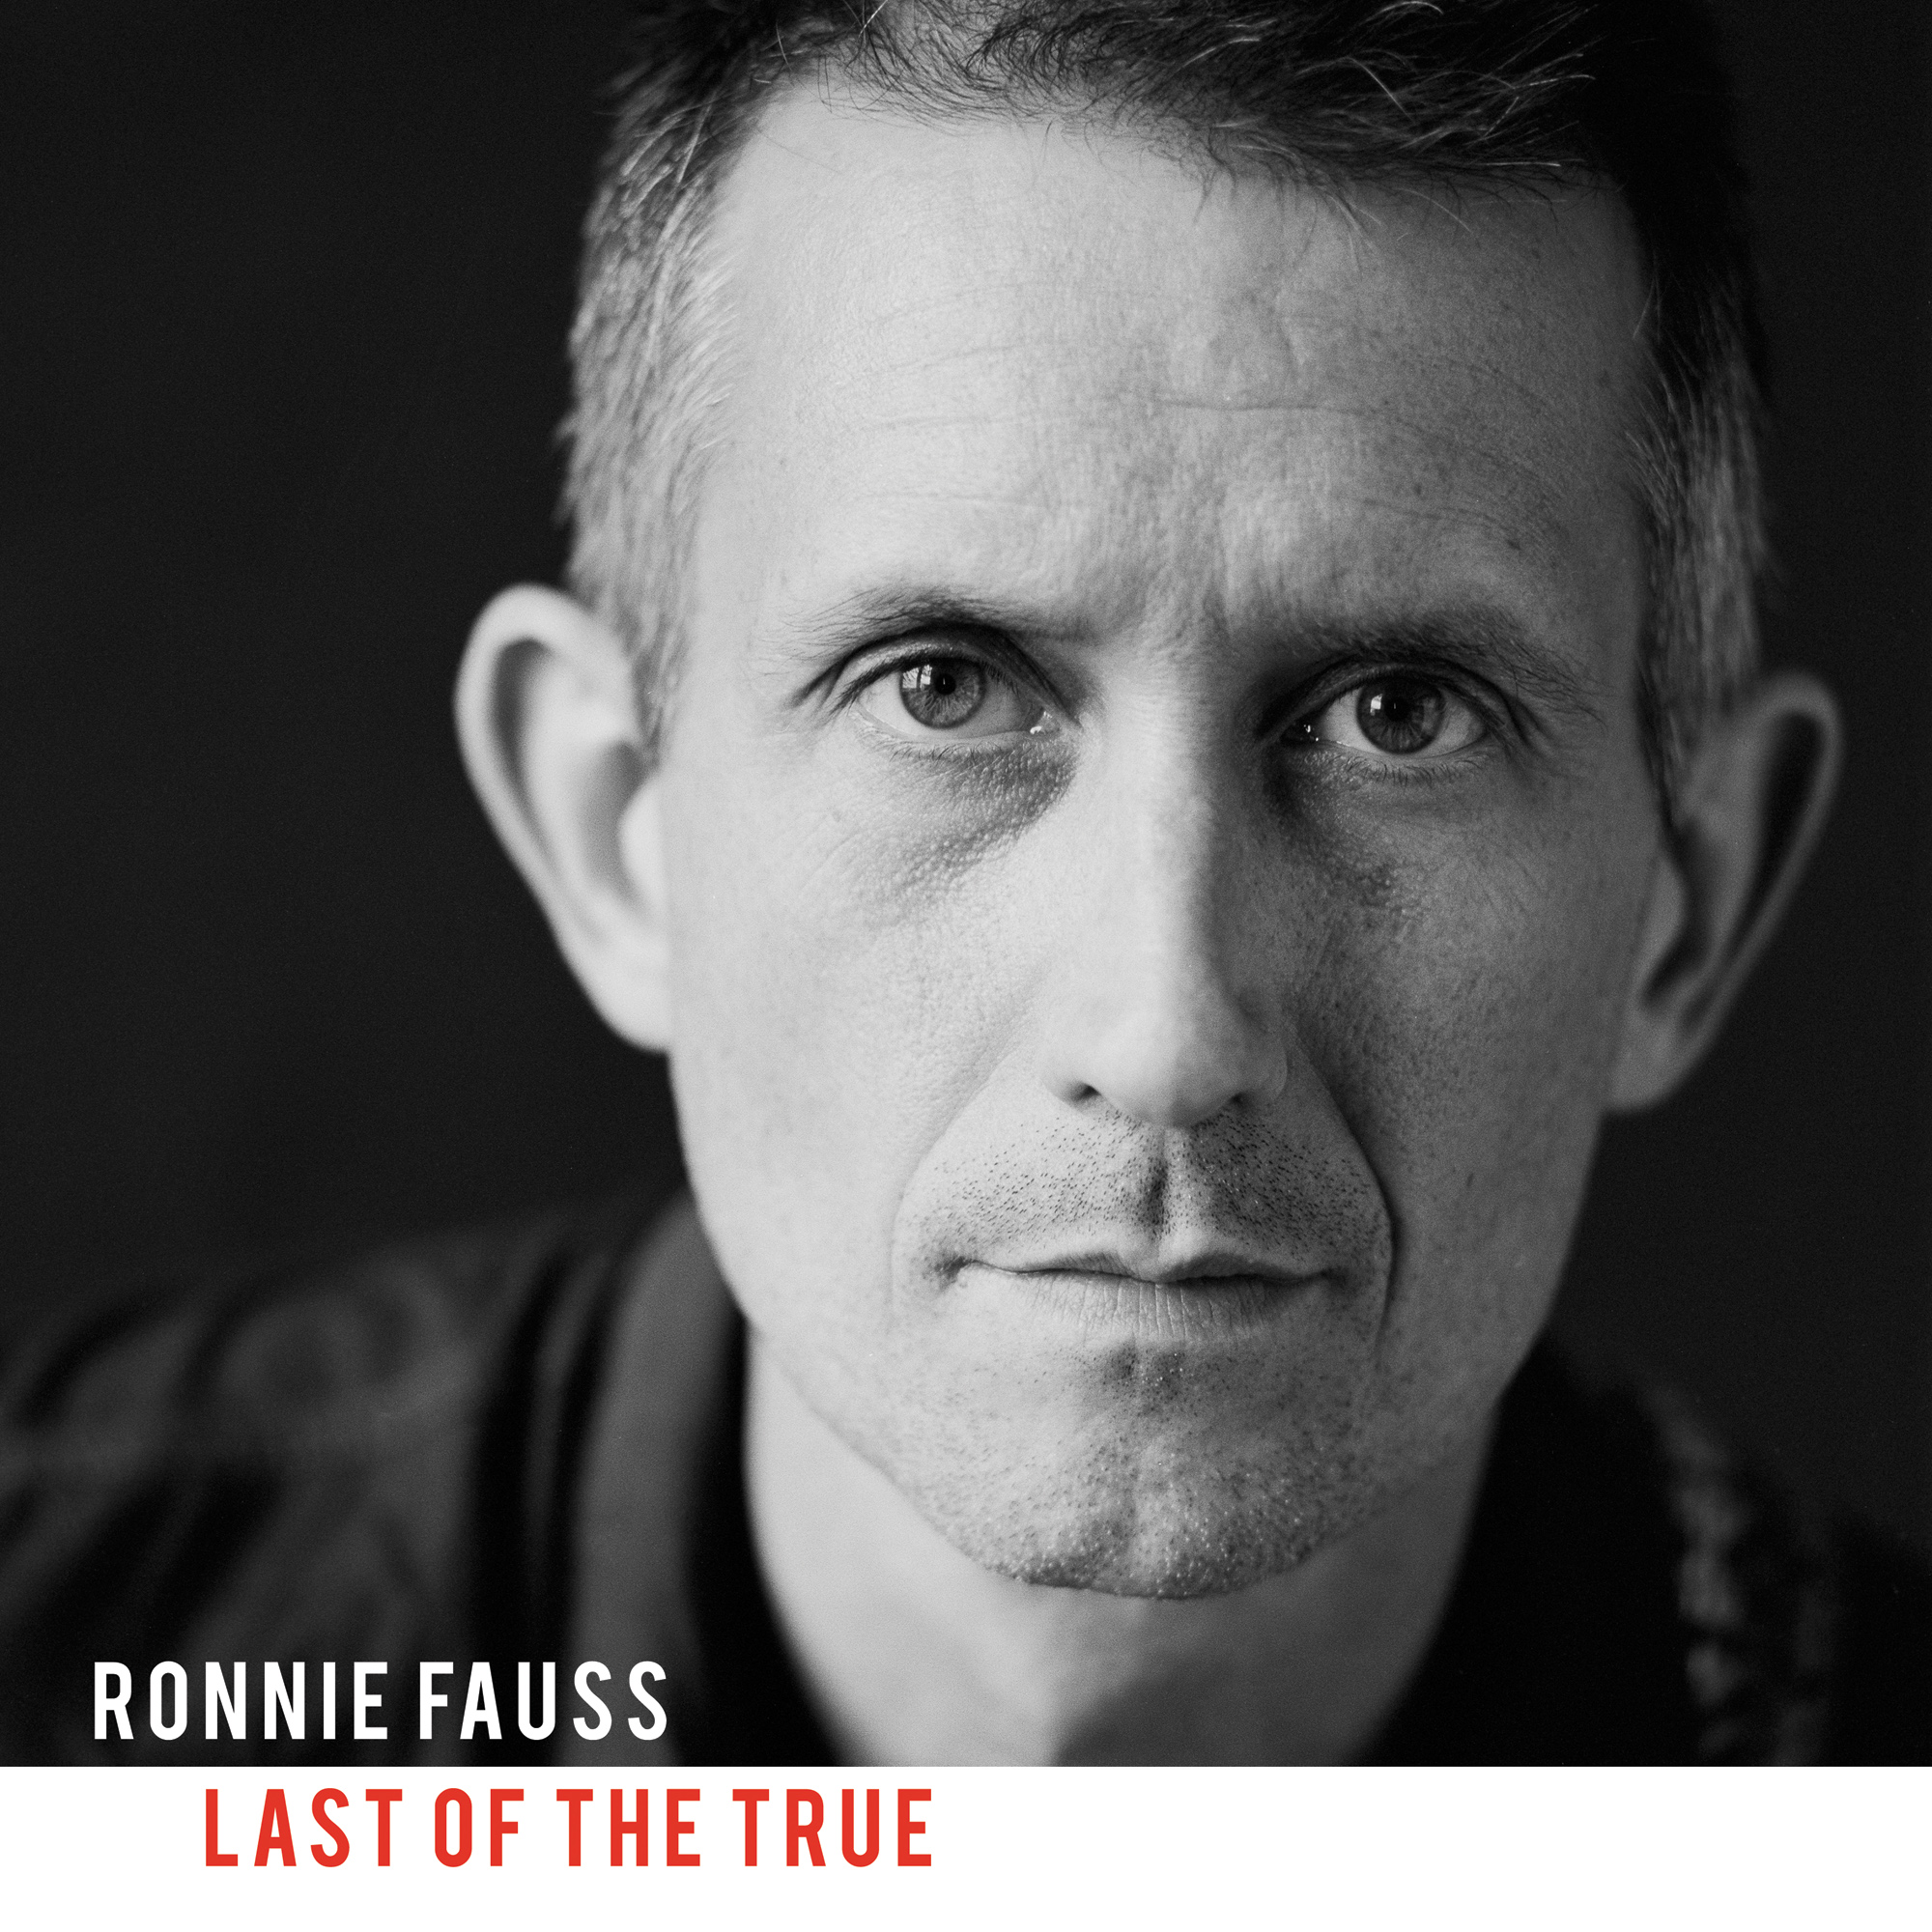 Ronnie Fauss - Last of the True